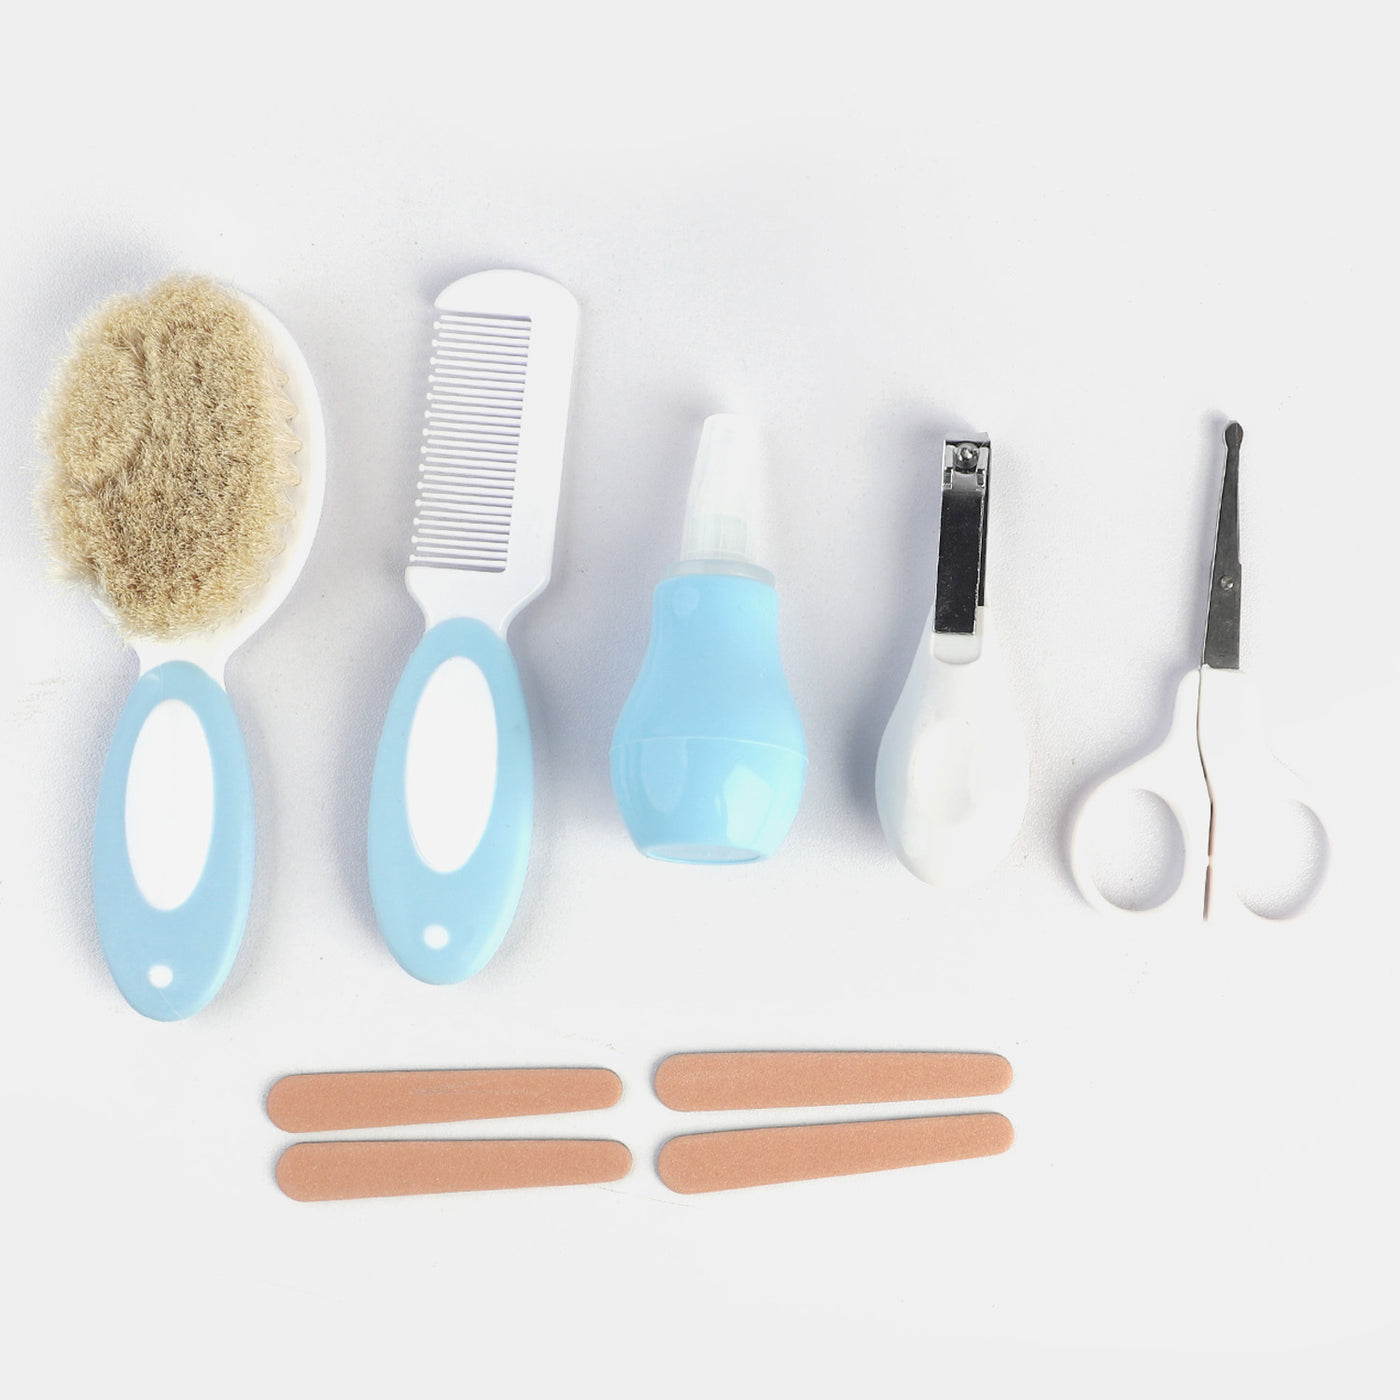 6 Piece Baby Nail Care & Grooming Kit